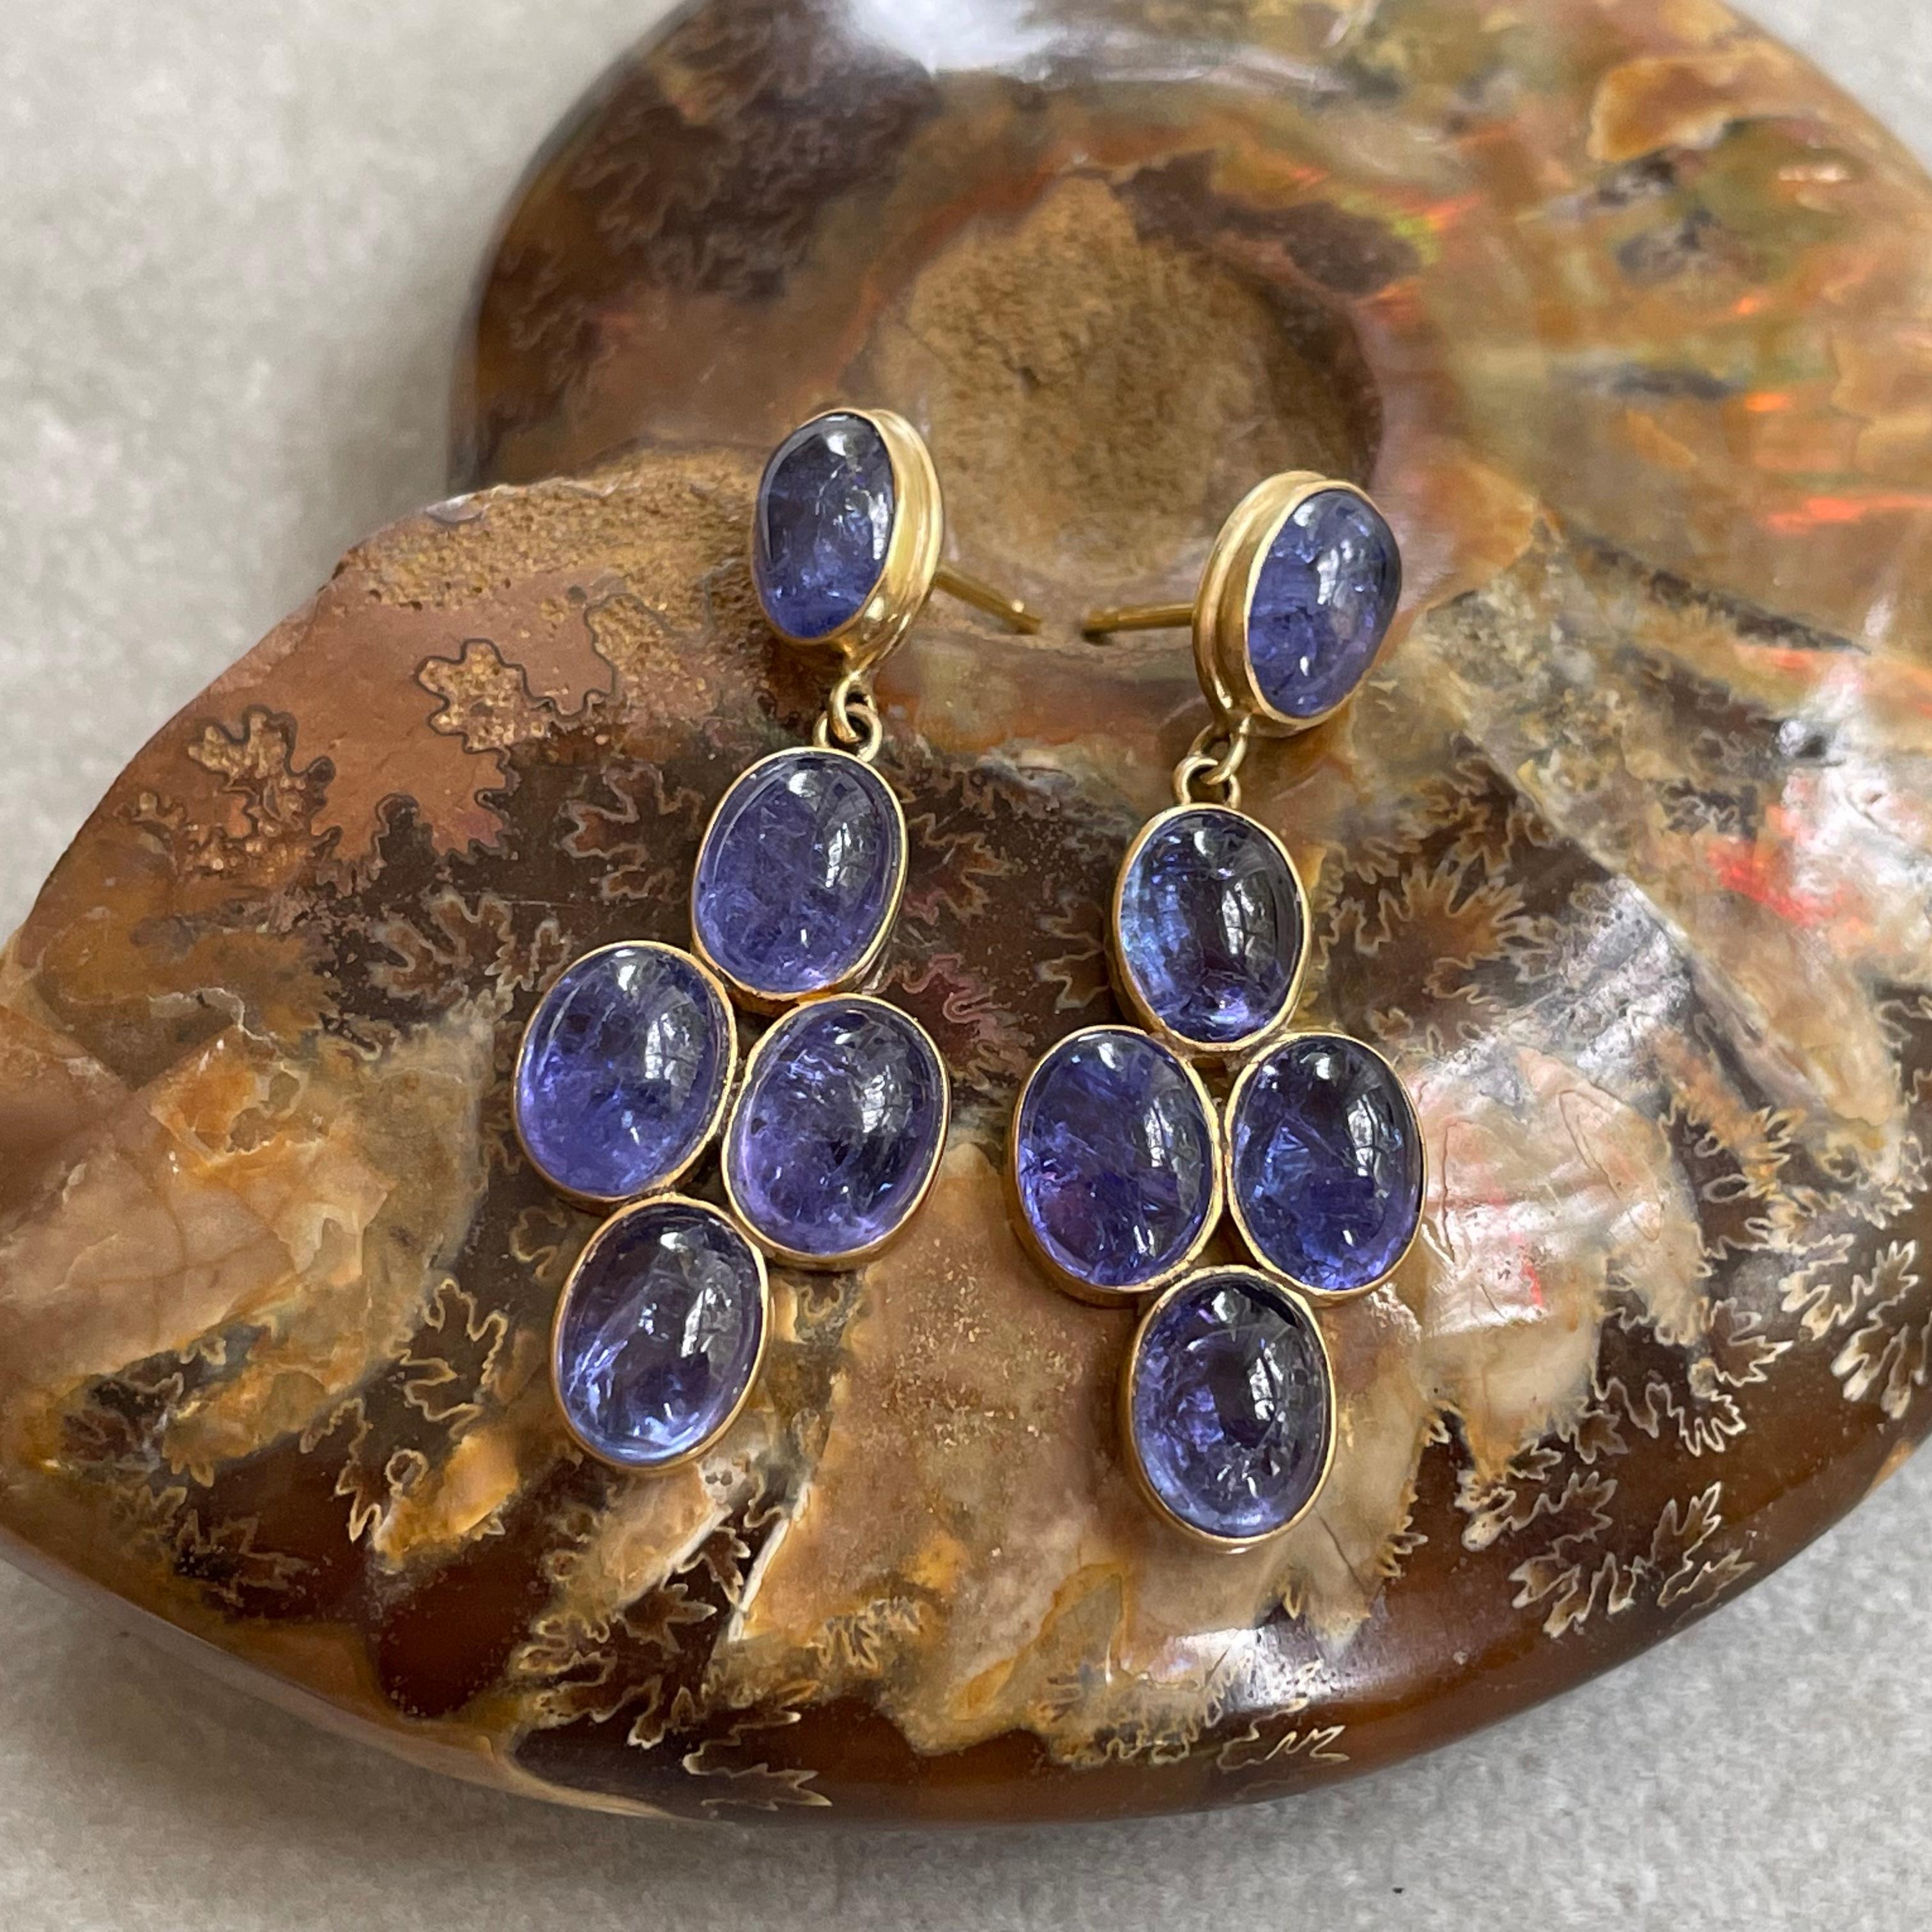 Deep purplish blue 6 x 8 mm oval tanzanite cabochons in a vertical grouping hang below a similar cabochon post in this attractive design. A big splash of color!